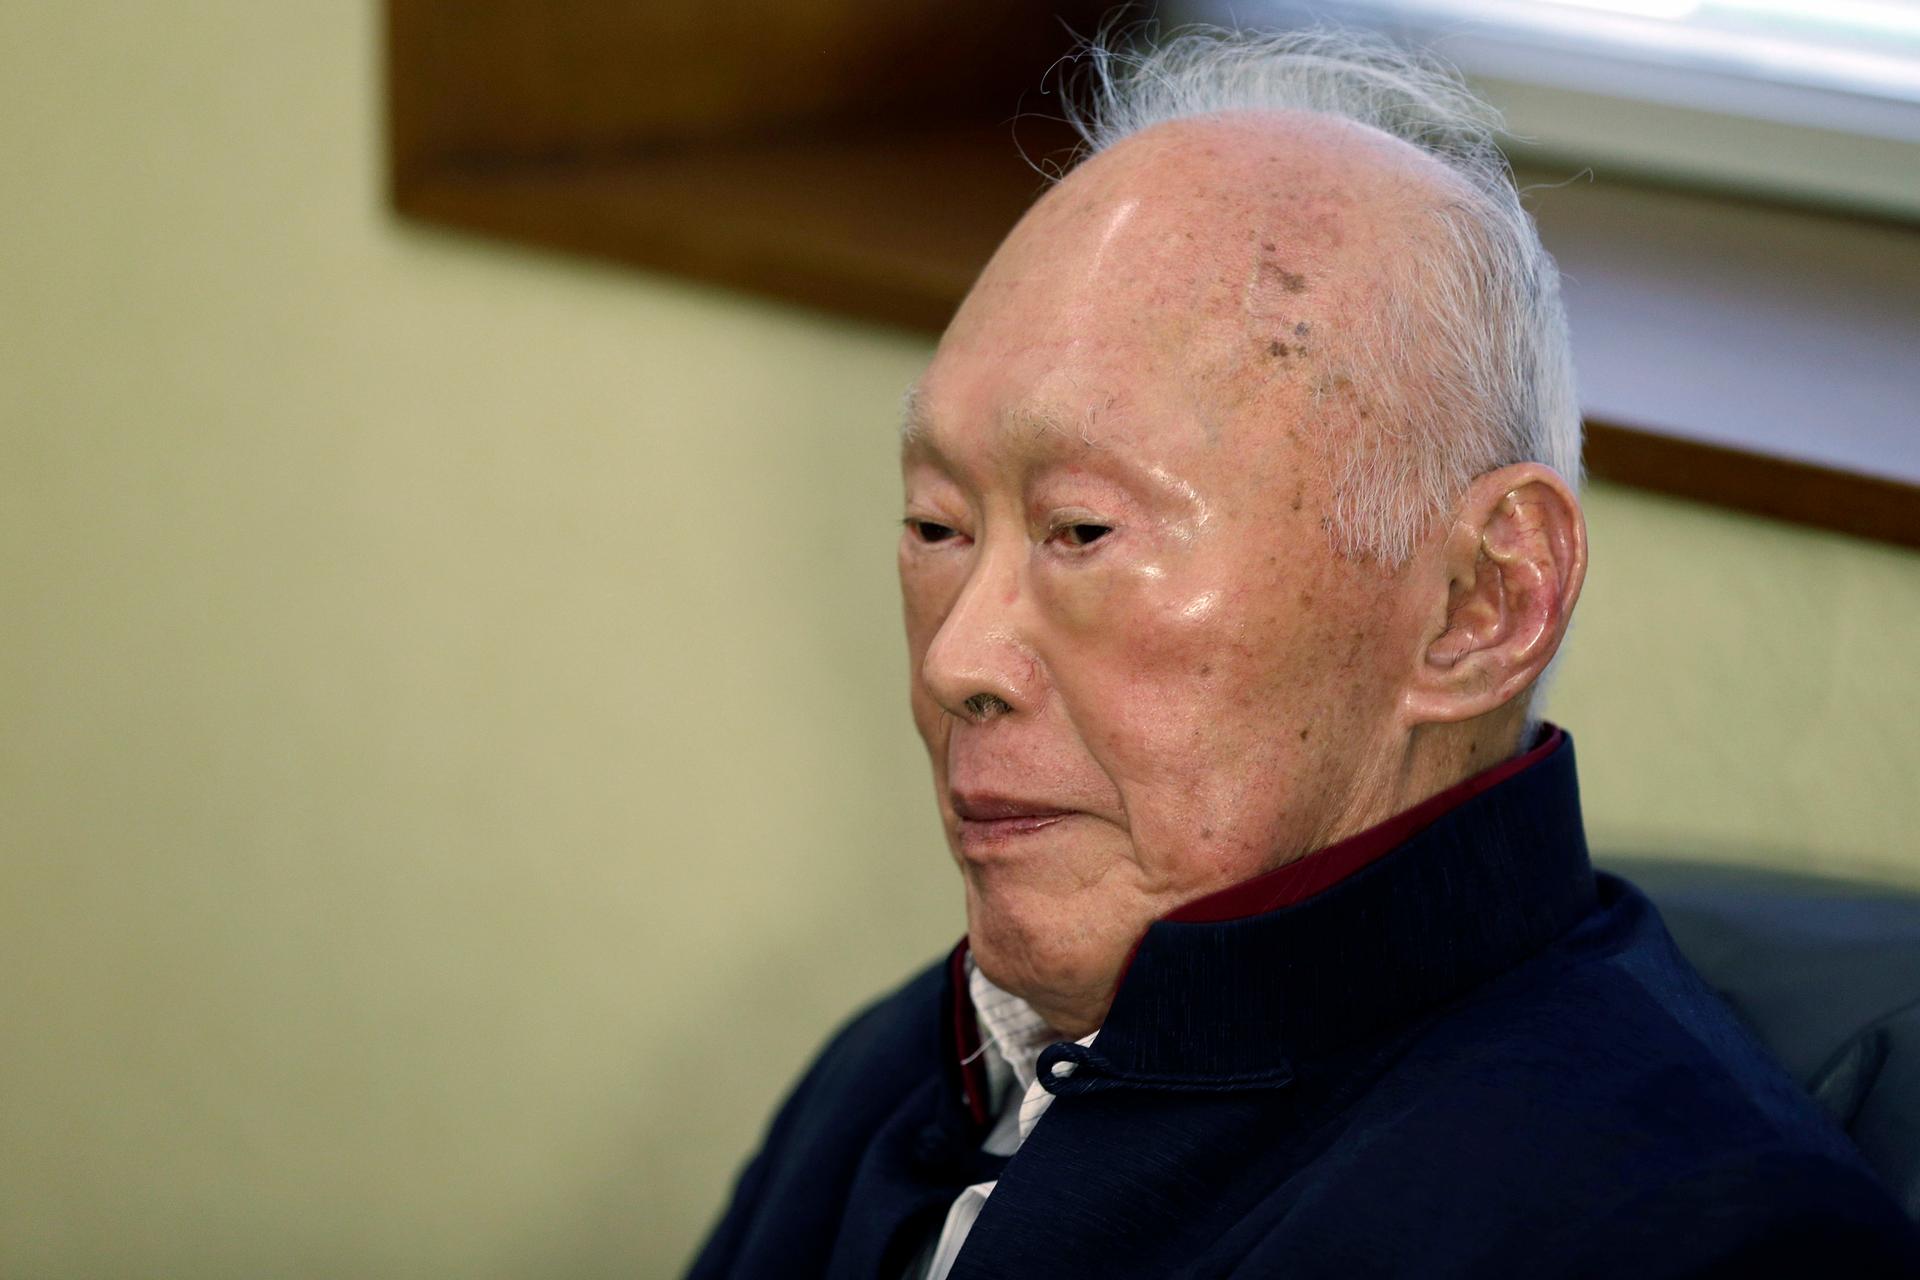 Former Singaporean Prime Minister Lee Kuan Yew died on Monday, March 23, at the age of 91. He is credited for turning Singapore into an economic and educational success story.